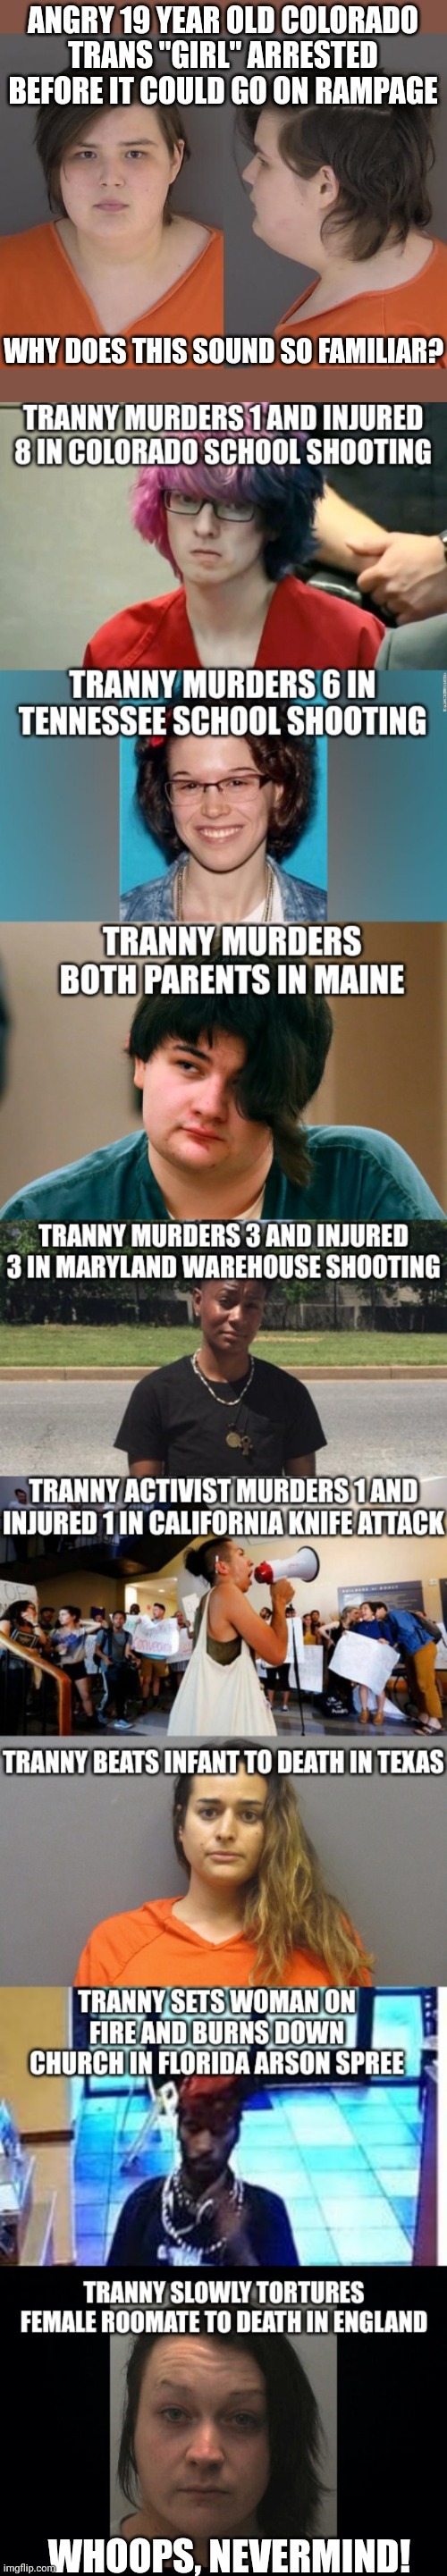 So we can't have any discussion about mental health anymore? Because there is a mental health issue here.... | WHOOPS, NEVERMIND! | image tagged in gender identity,expectation vs reality,mental health,triggered liberal,this is getting out of hand,murder | made w/ Imgflip meme maker